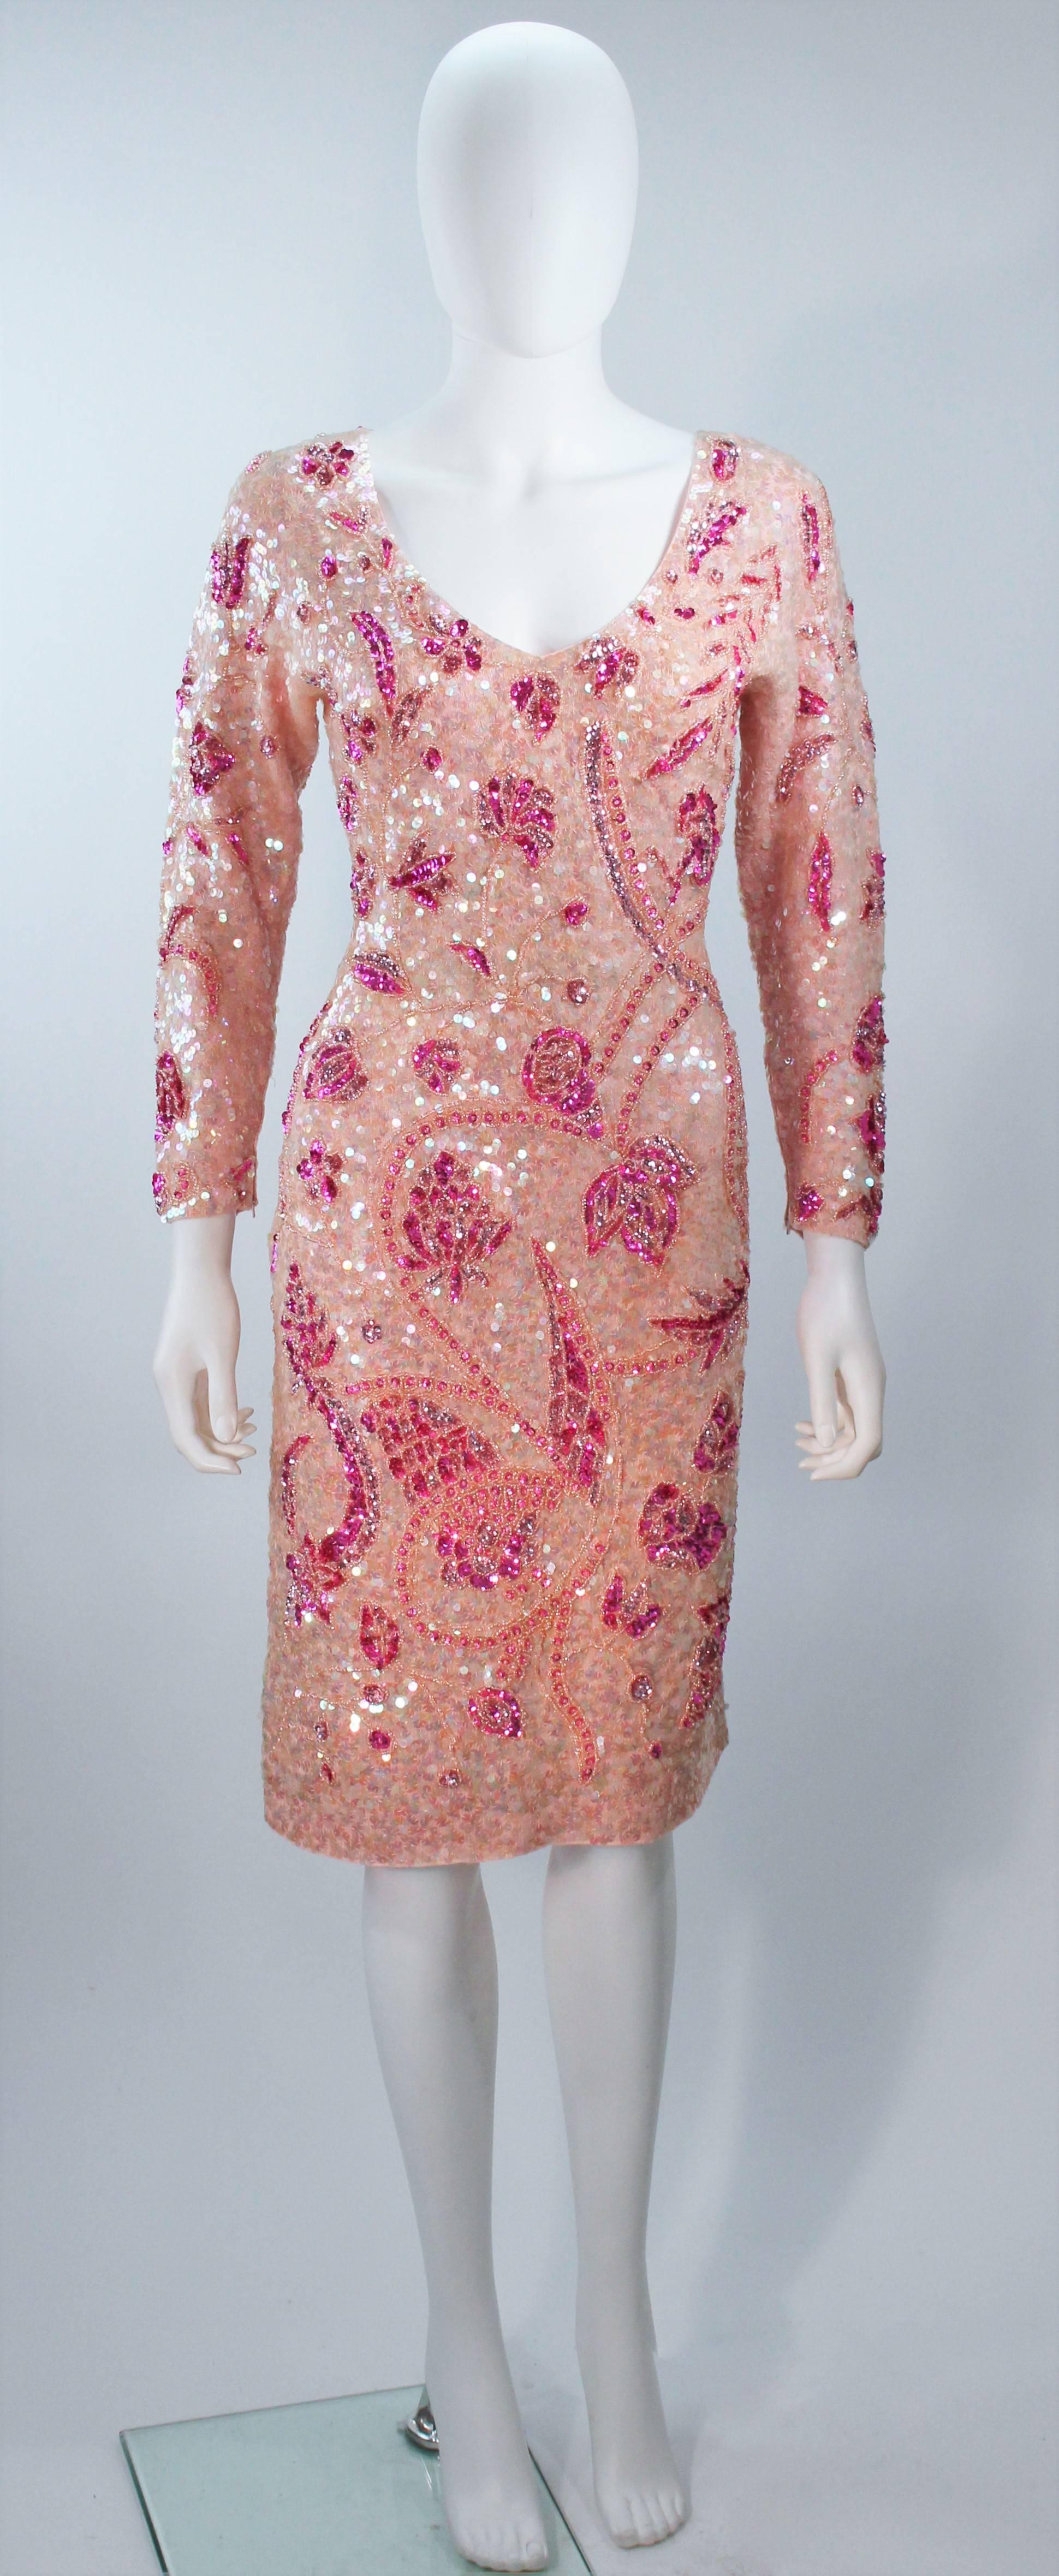  This Gene Shelly dress is composed of a pink stretch knit wool with pink and magenta sequin applique. There is a center back zipper closure. In excellent vintage condition. 

  **Please cross-reference measurements for personal accuracy. Size in